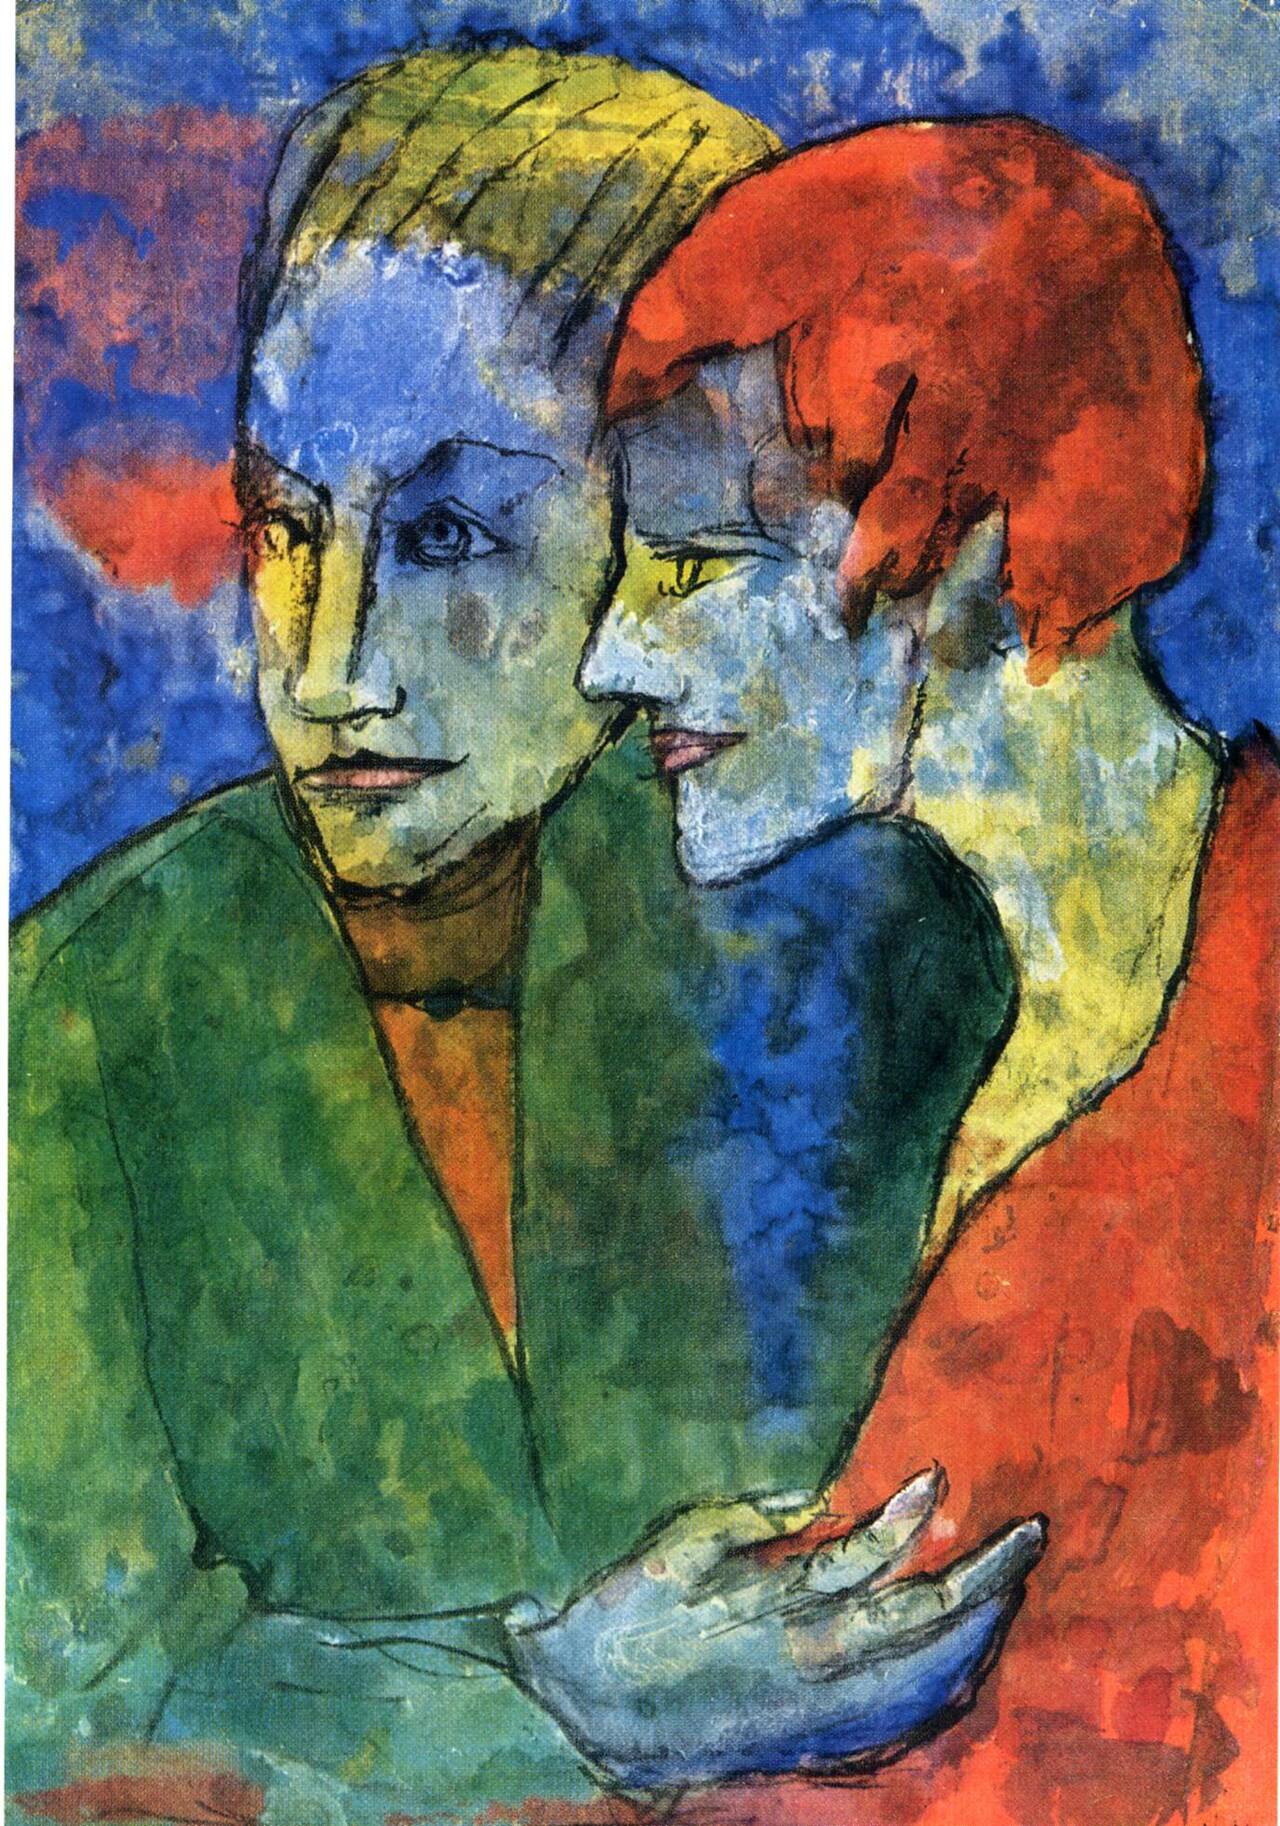 “@Brindille_: #Artwork #painting "Young Couple", 1935 by German #artist Emil Nolde (1967 - 1956)
 #expressionism http://t.co/BfINNAgklA”